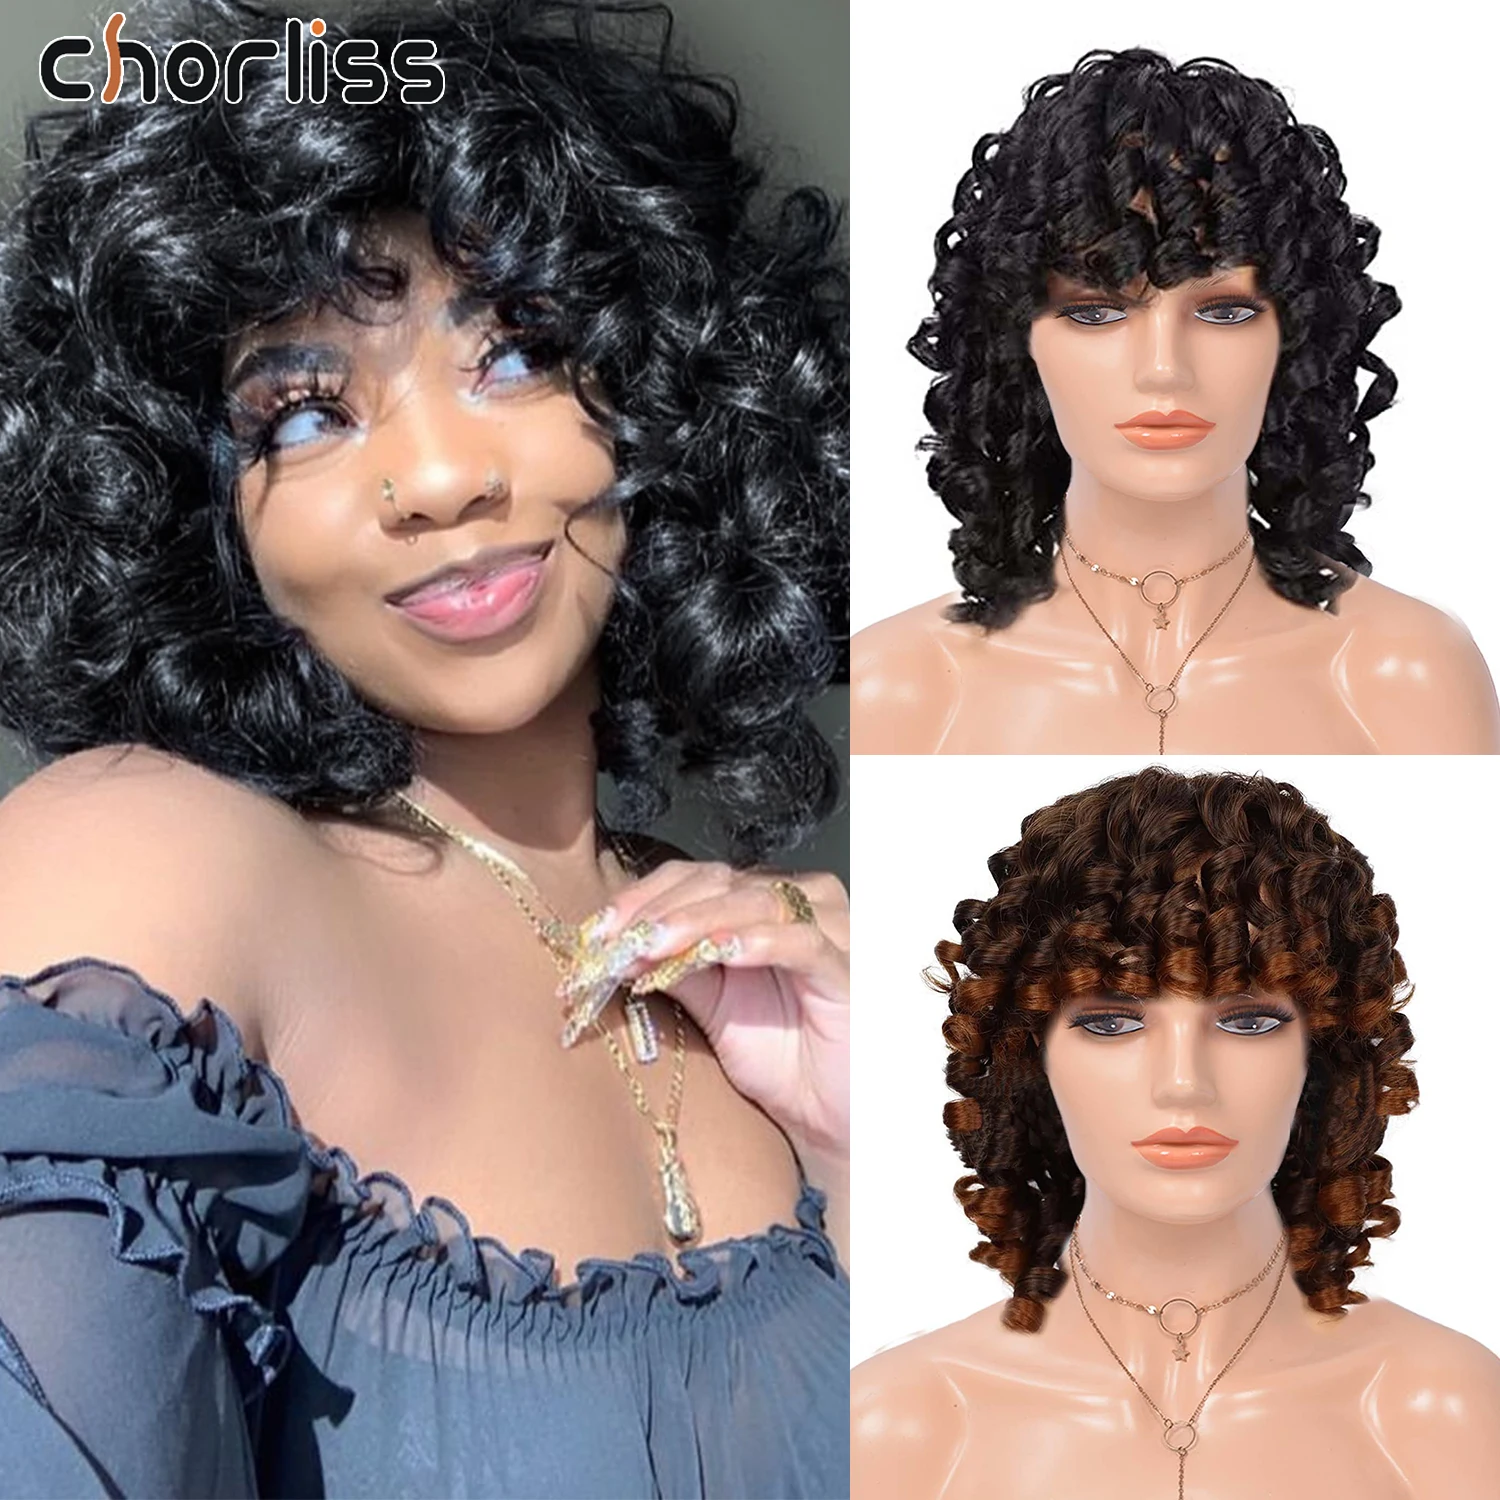 

14 Inch Spiral Bouncy Curly Wigs Bouncy Shaggy Bang Wigs Short Kinky Curly Bob Wig Synthetic Fluffy Cosplay Wigs For Afro Women